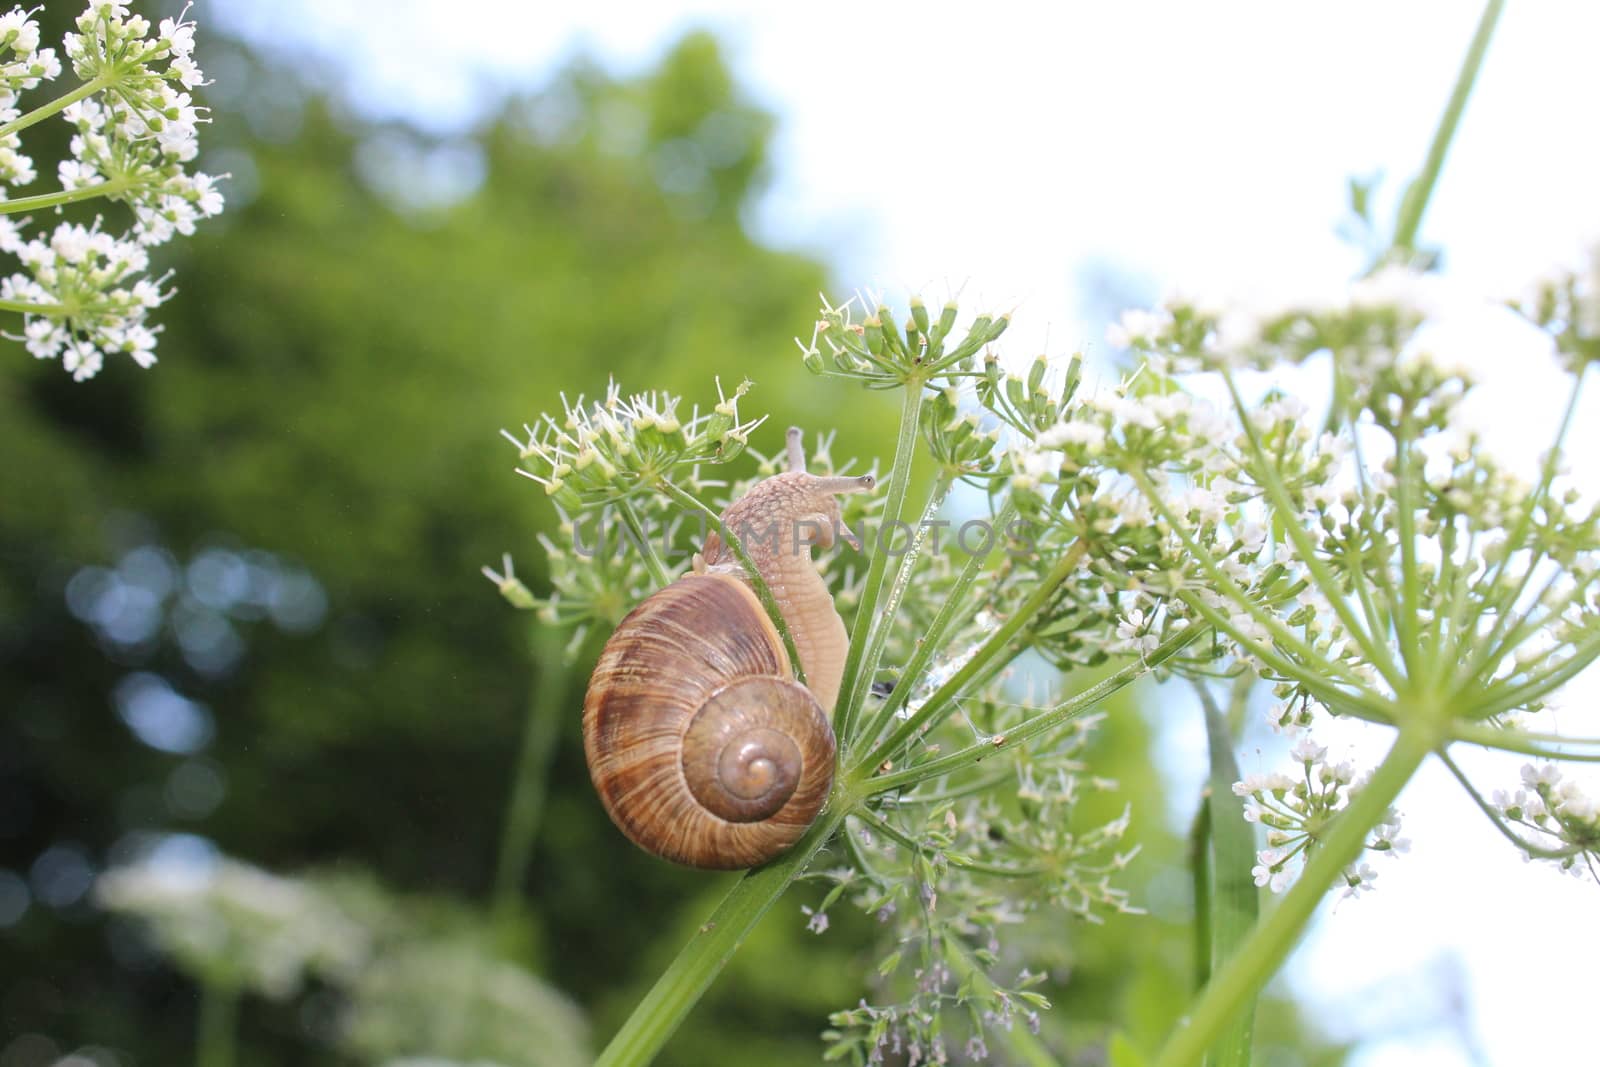 The picture shows a little vineyard snail on a flower